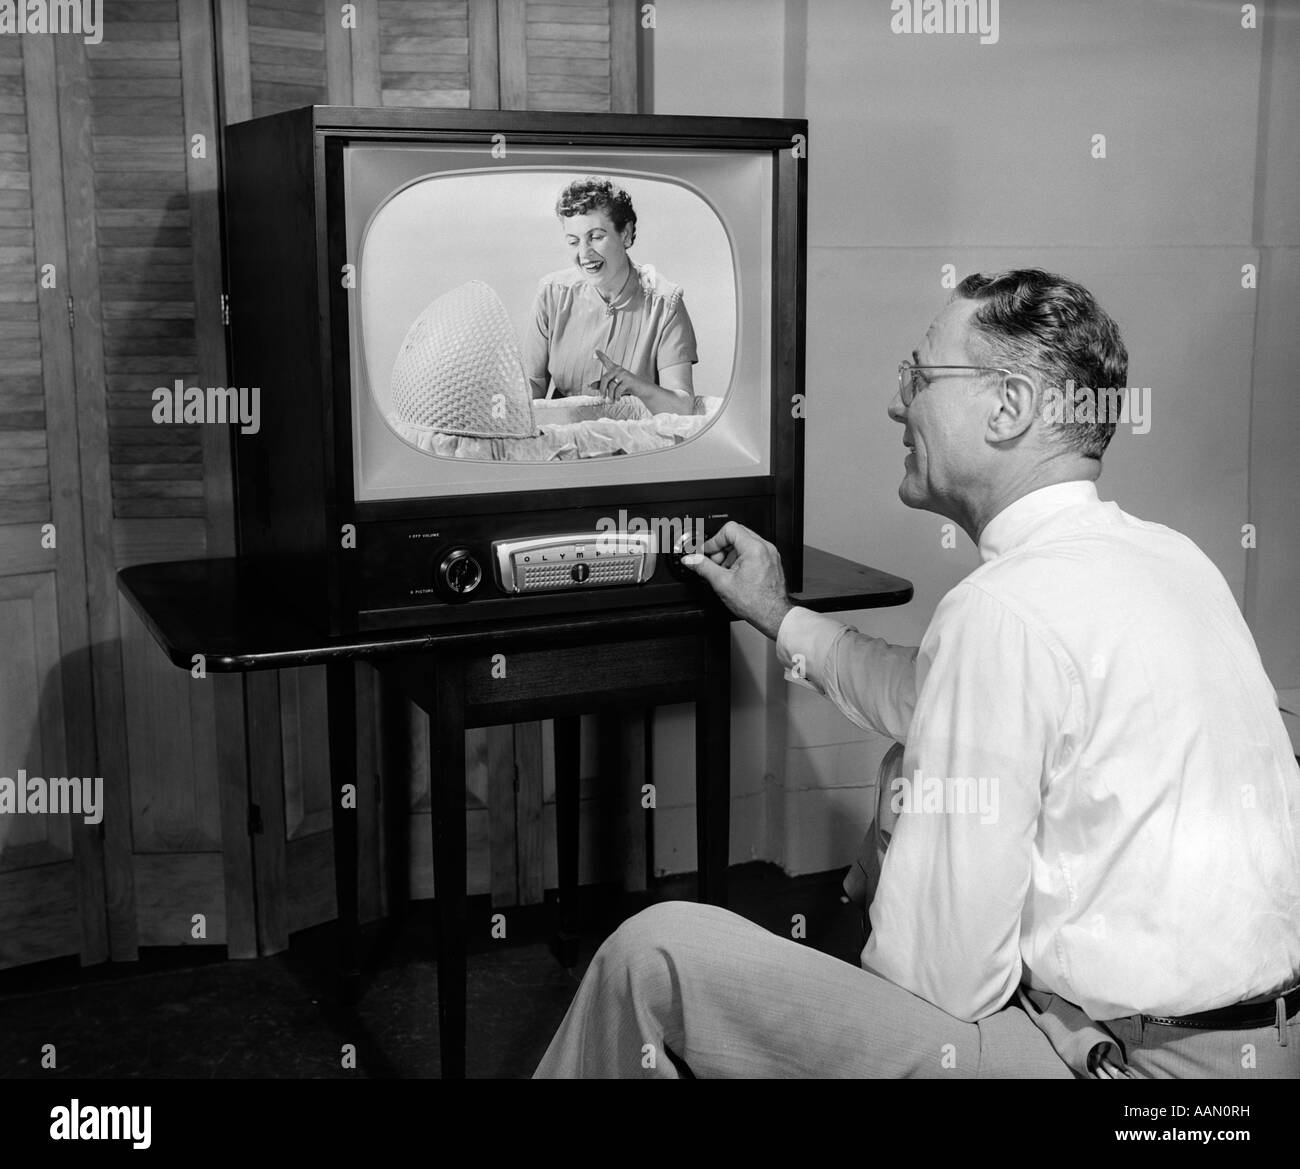 1950s-man-tuning-television-to-a-picture-of-woman-looking-into-bassinet-AAN0RH.jpg